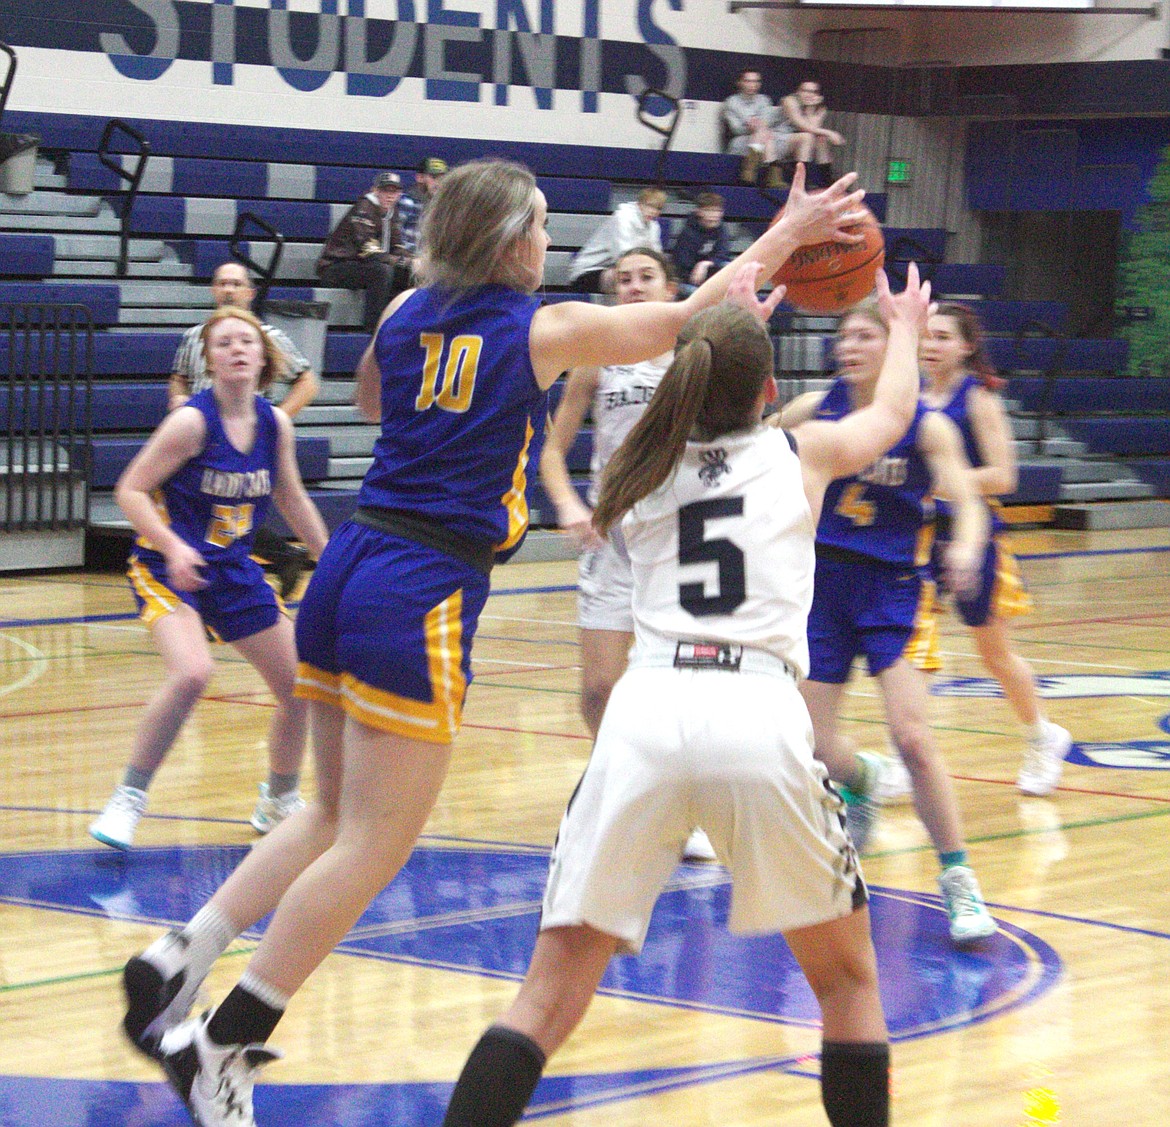 Amari Printz-Hay goes for steal against Bonners Ferry on Jan. 14.